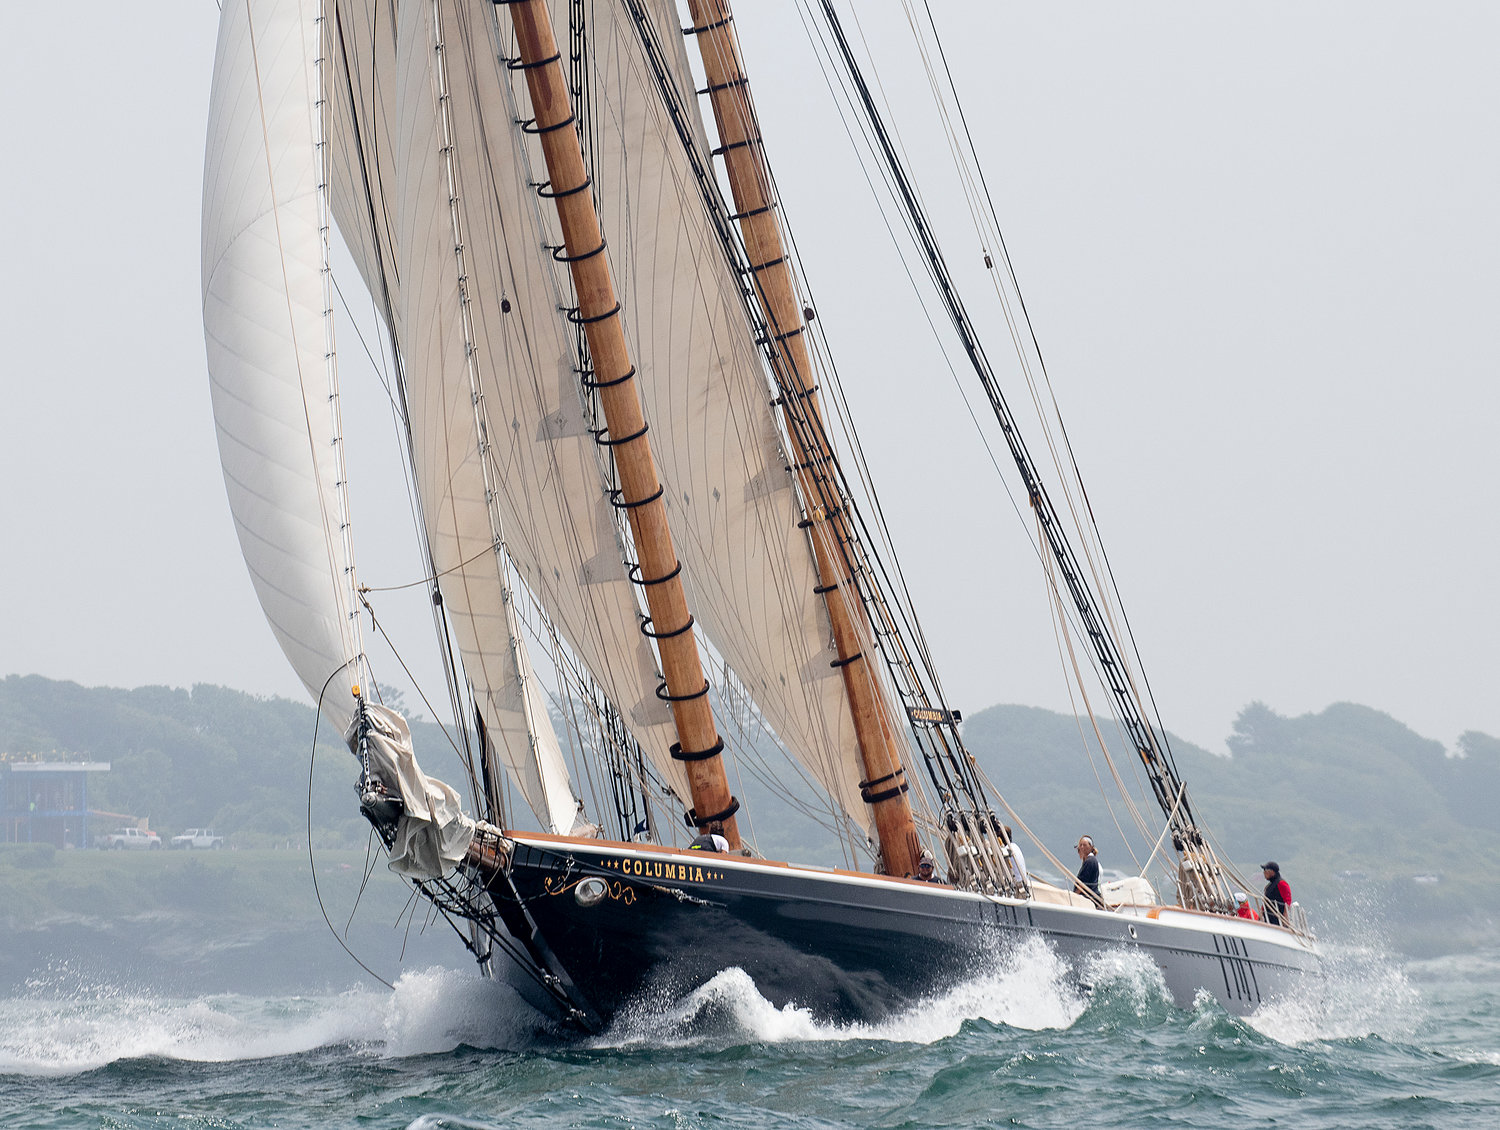 Columbia, a Herreshoff racing schooner owned by Martin Sutter of the CCA and NYYC, preps for the start of the Newport Bermuda Race on Friday, June 17, in Newport Harbor.